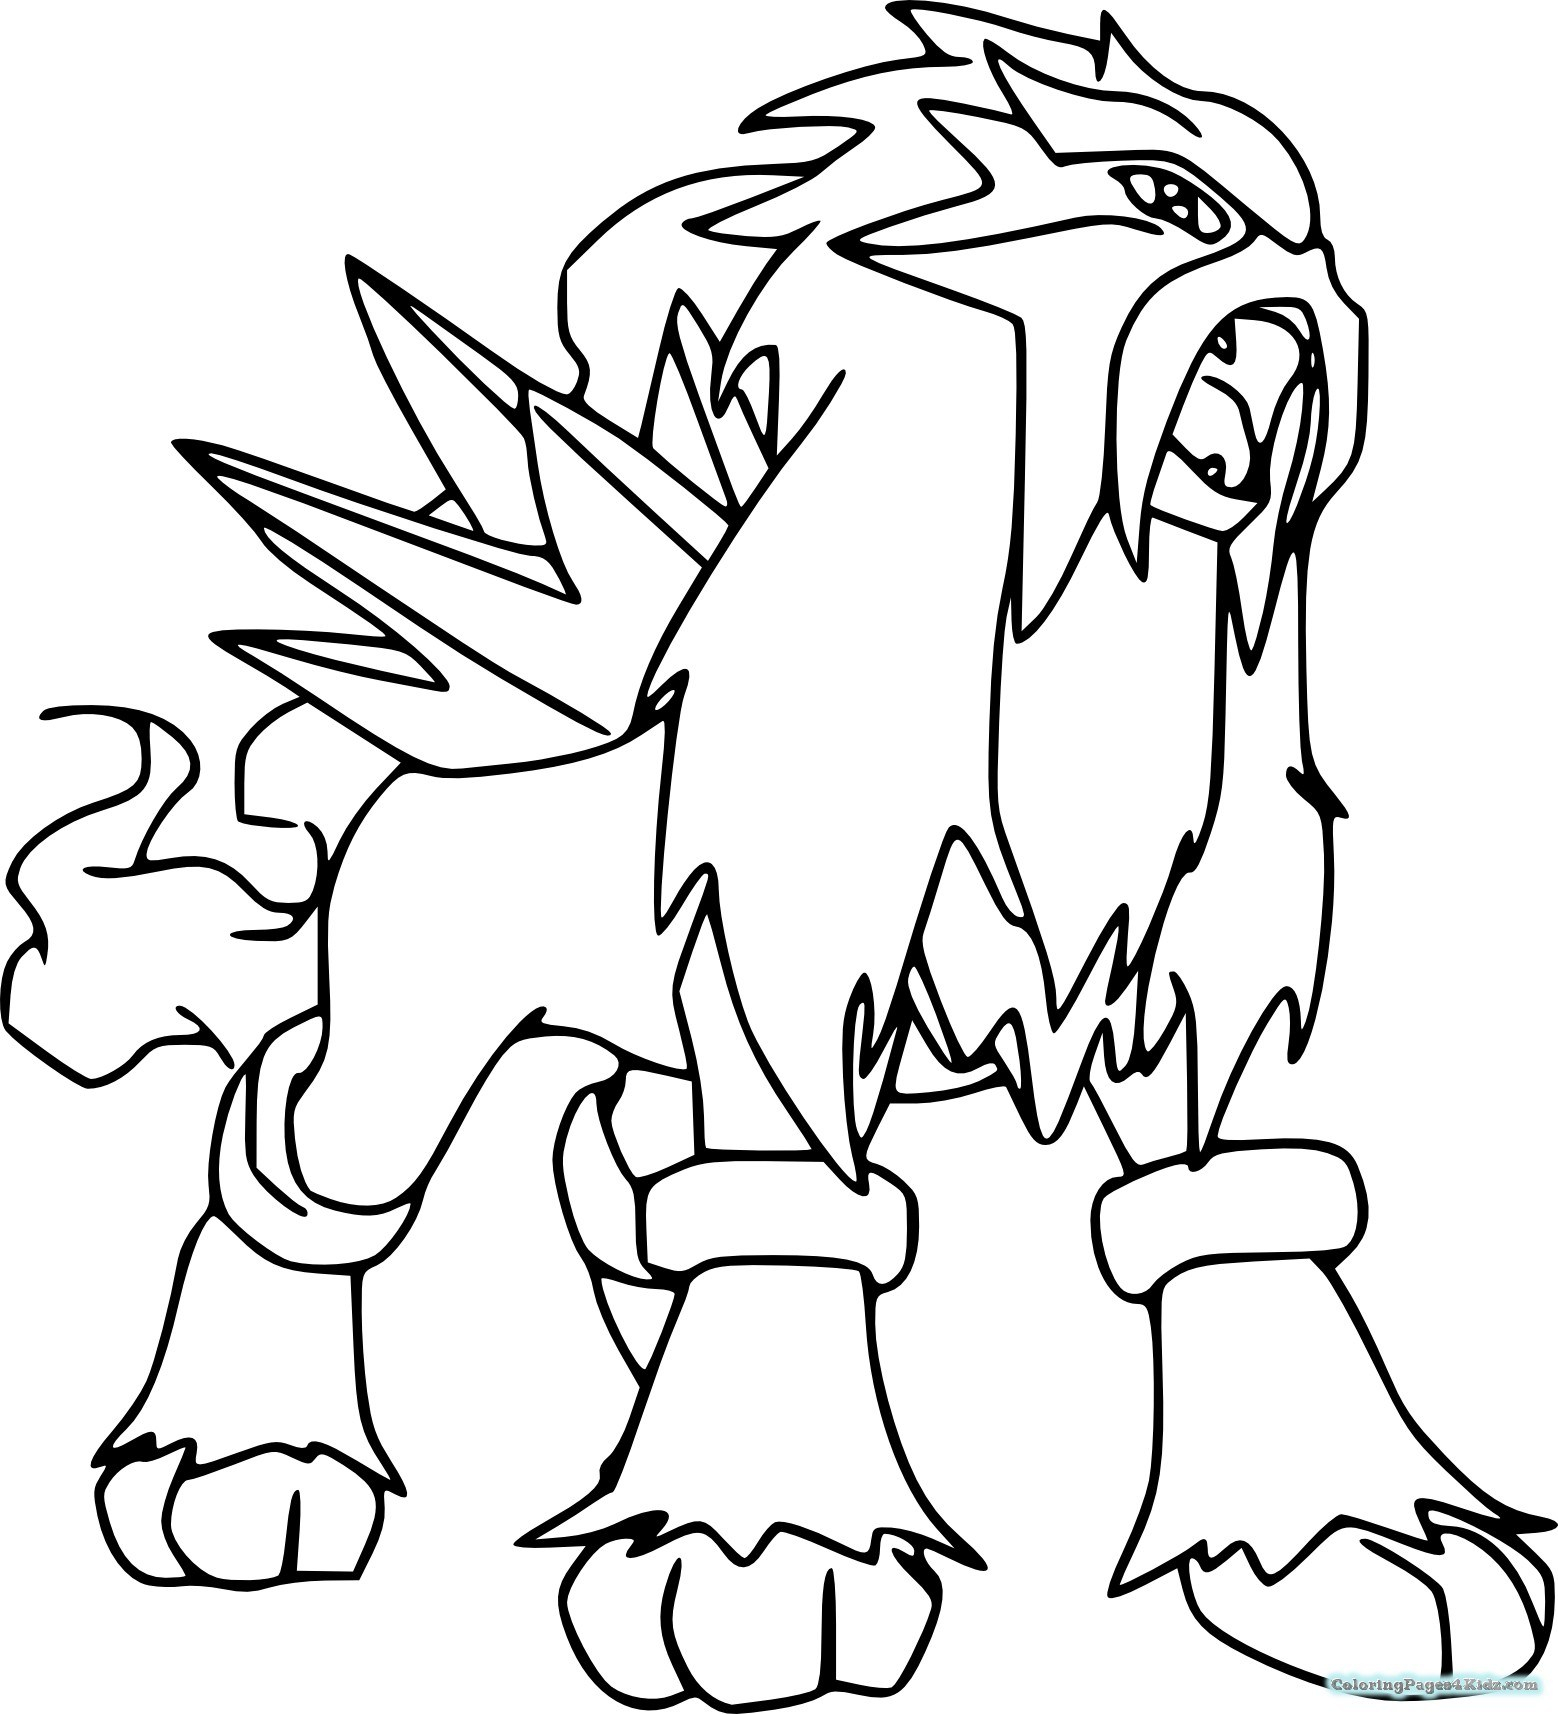 Giratina Coloring Pages Legendary Pokemon Coloring Pages Free Printable Coloring Page For Kids